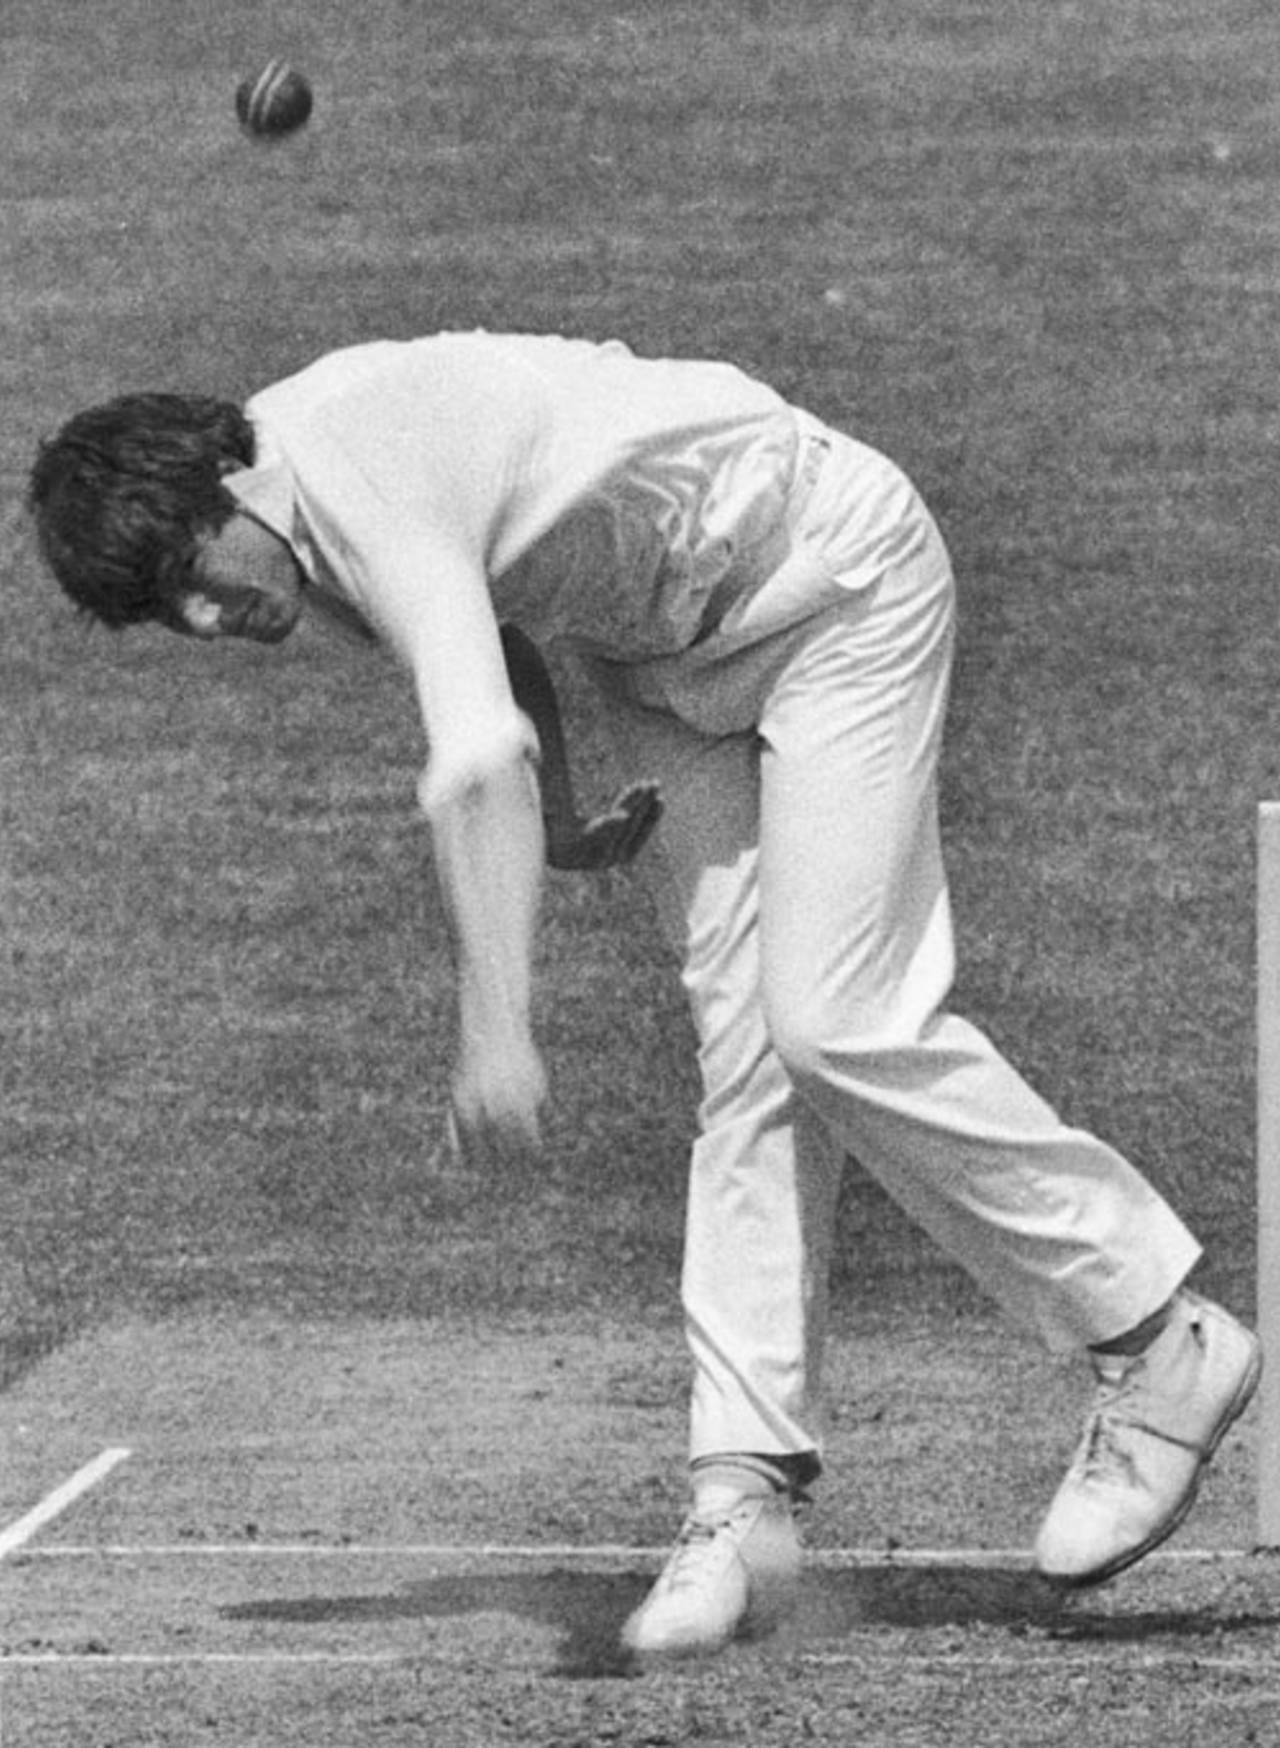 David Thomas, a left-arm swing bowler, in action during 1978&nbsp;&nbsp;&bull;&nbsp;&nbsp;Hulton Archive/Getty Images